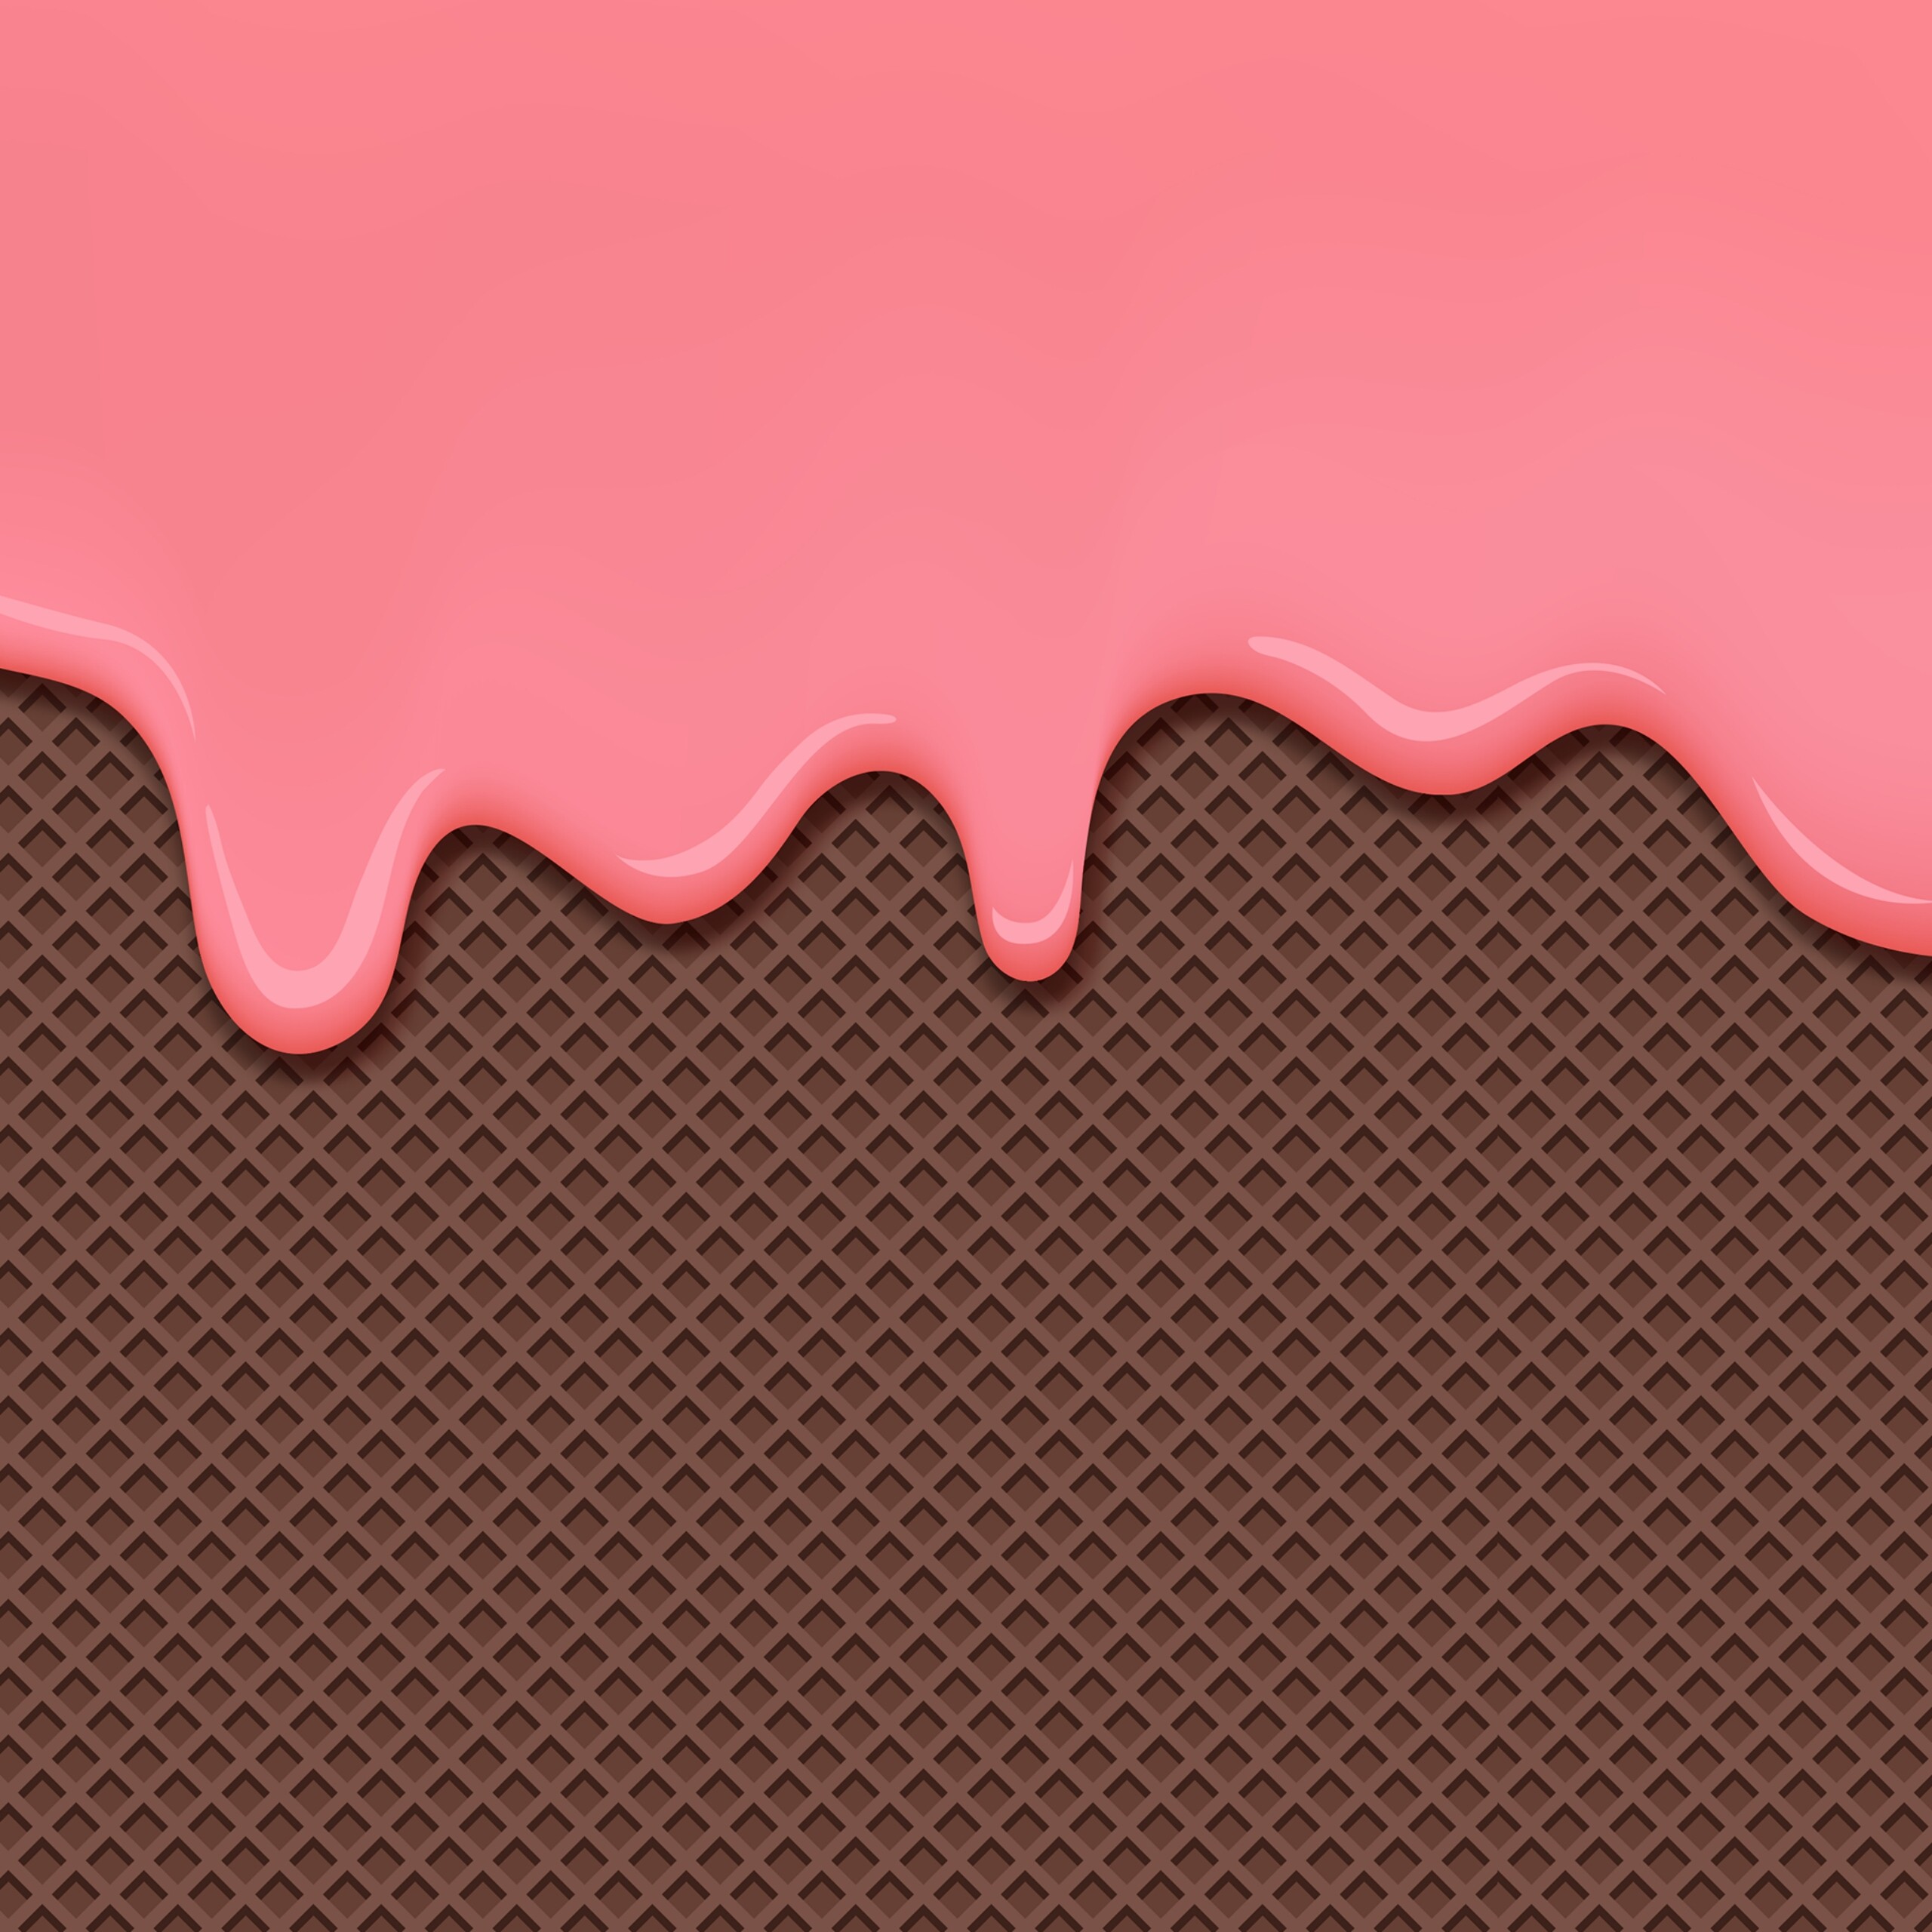 Pink Melting Ice Cream Abstract QHD Wallpaper